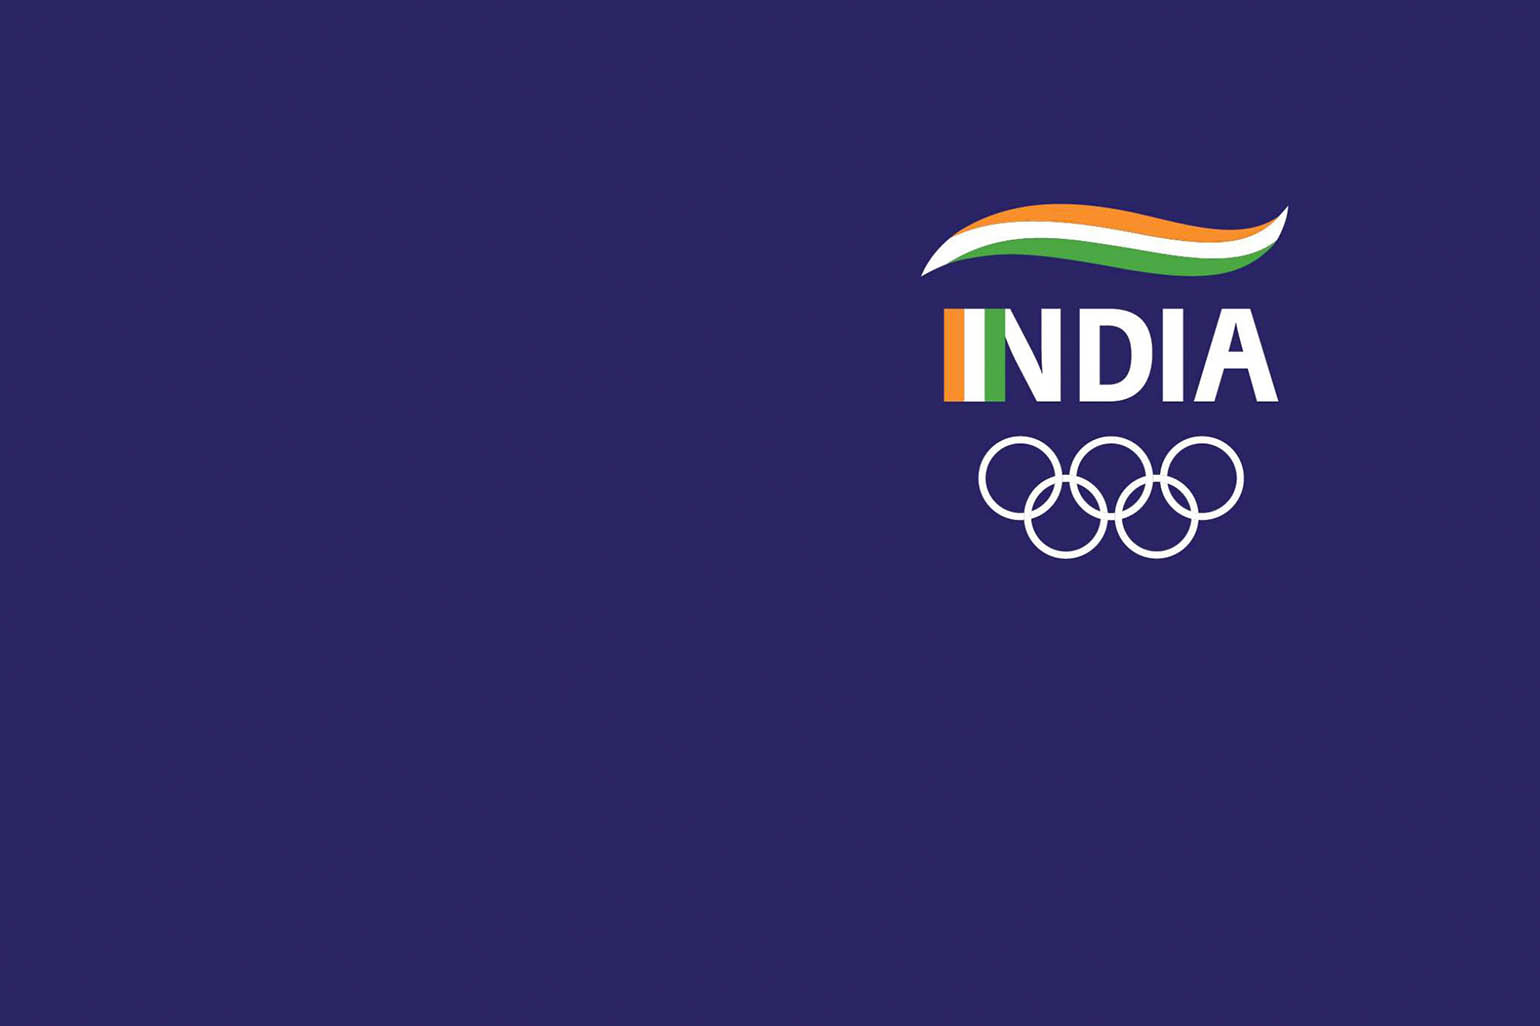 After 100 years, India gets its own identity in the Olympics arena